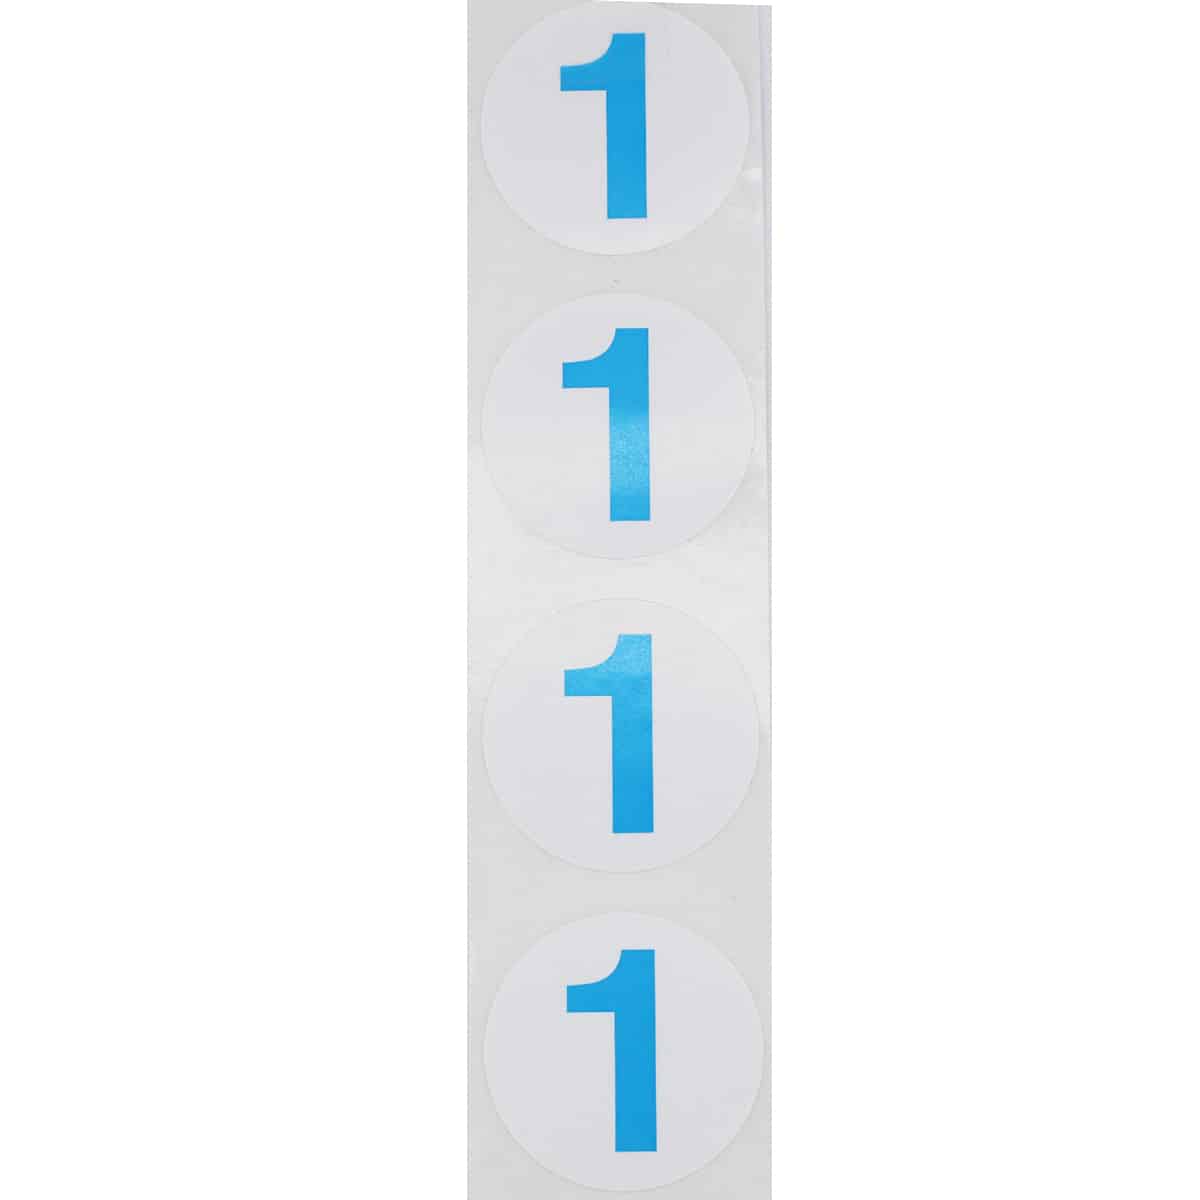 Color Coded Number Stickers 1 - 10 Bulk Pack 1.5 Round